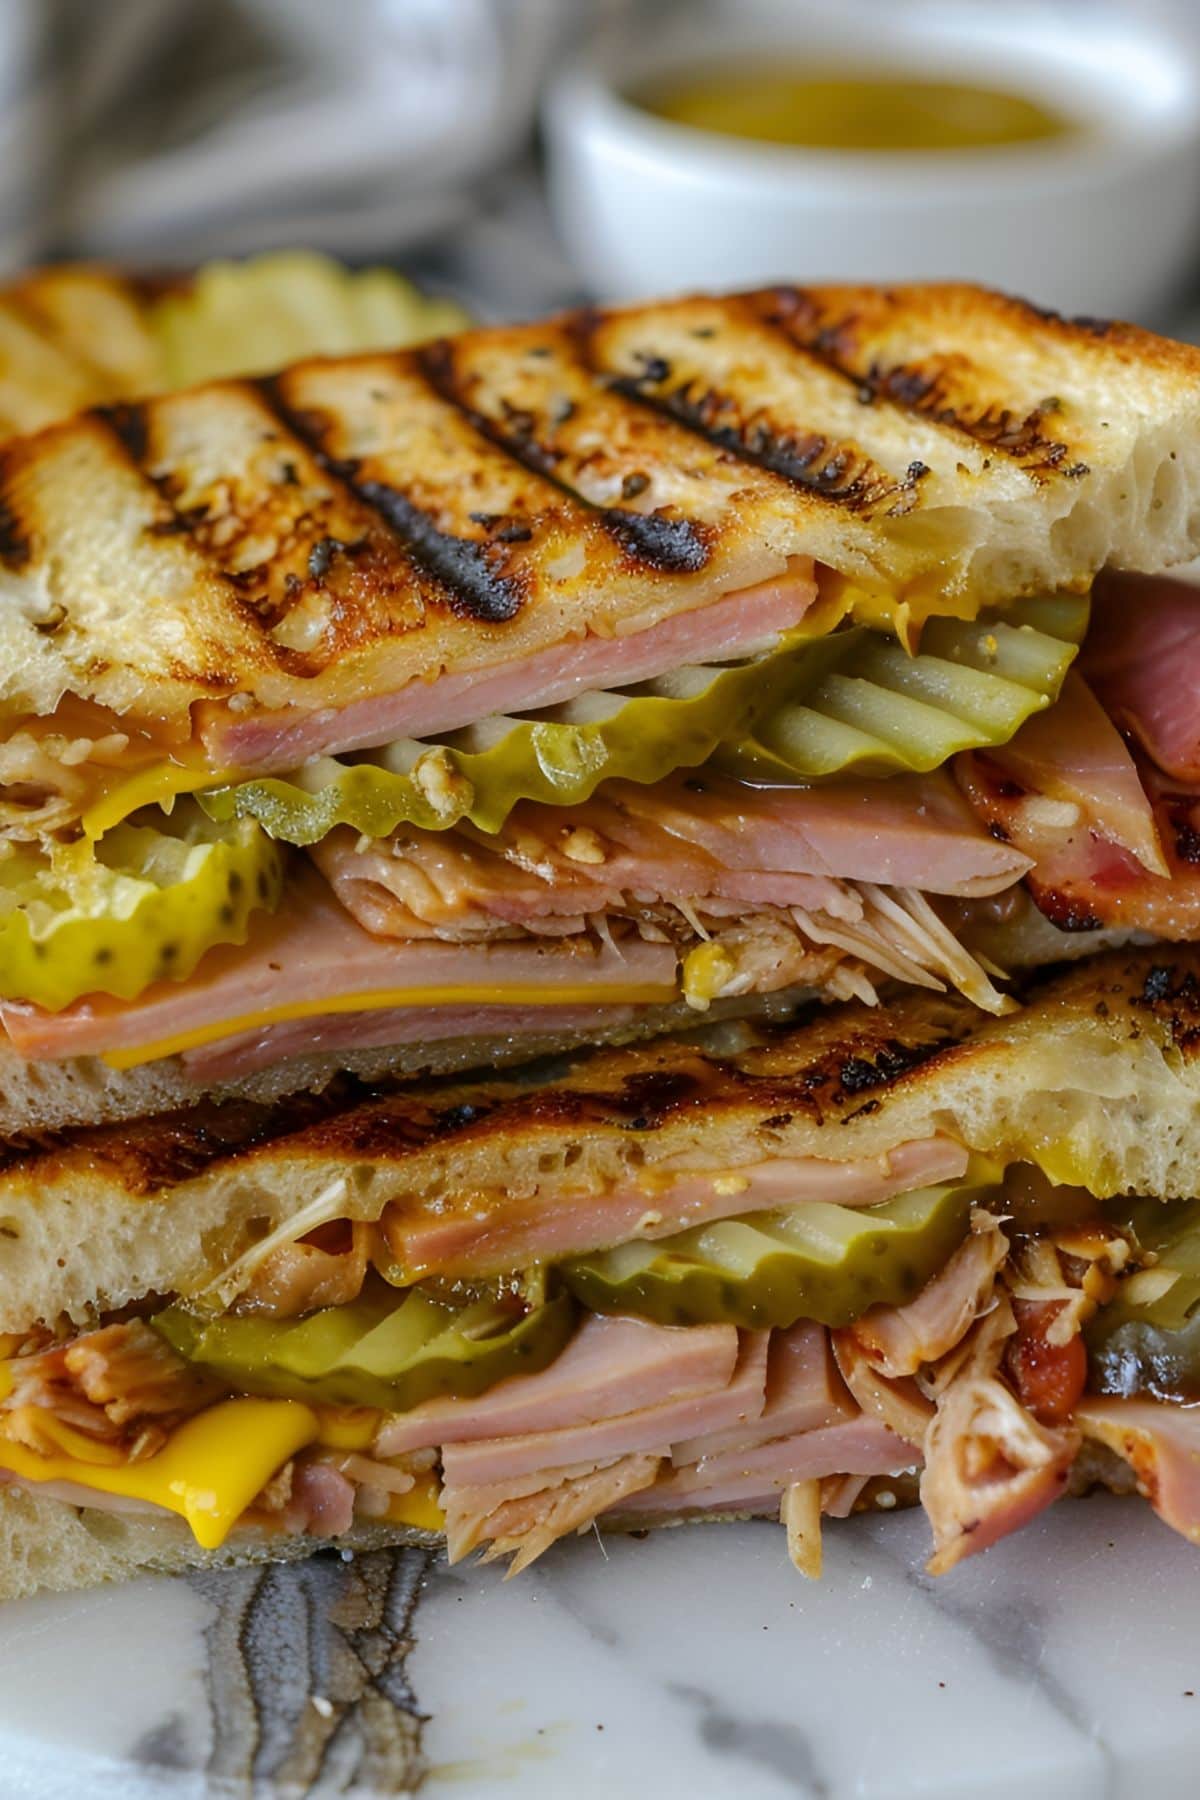 Two Halves Grilled Panini Cuban Sandwich with Ham, Pork, Cheese, Pickles, and Mustard Stacked